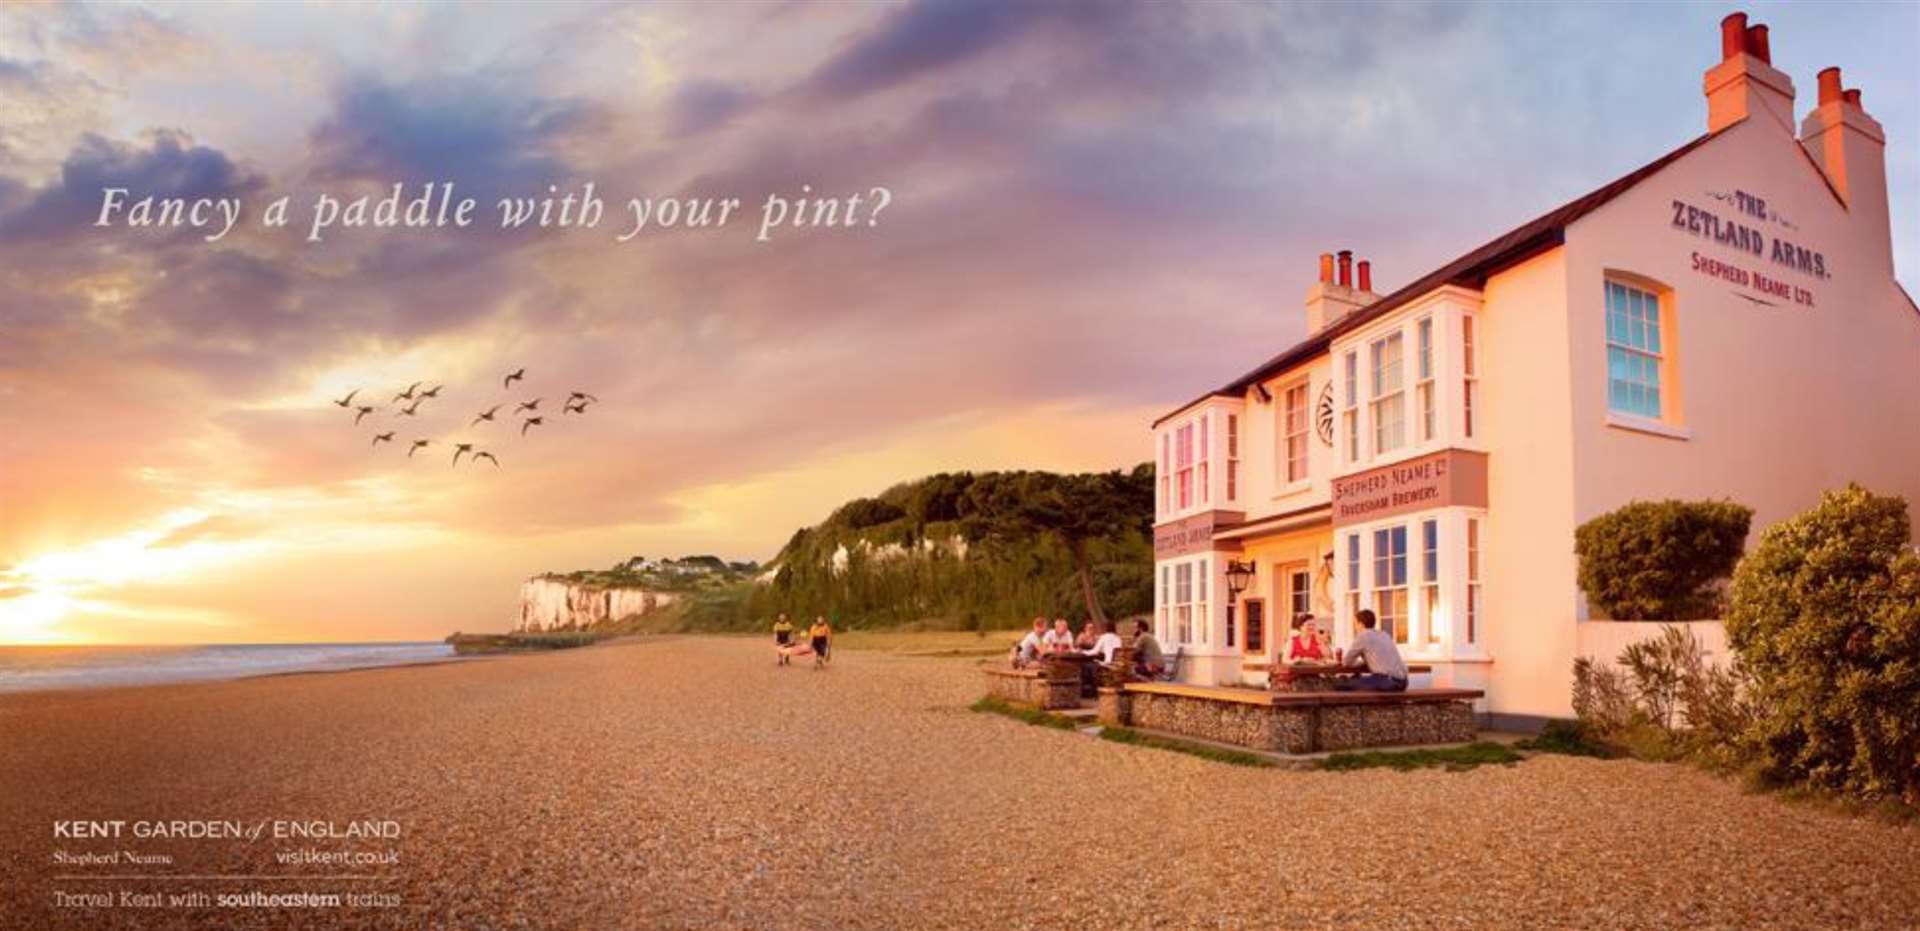 Visit Kent has created several promotional campaigns to attract visitors to the county